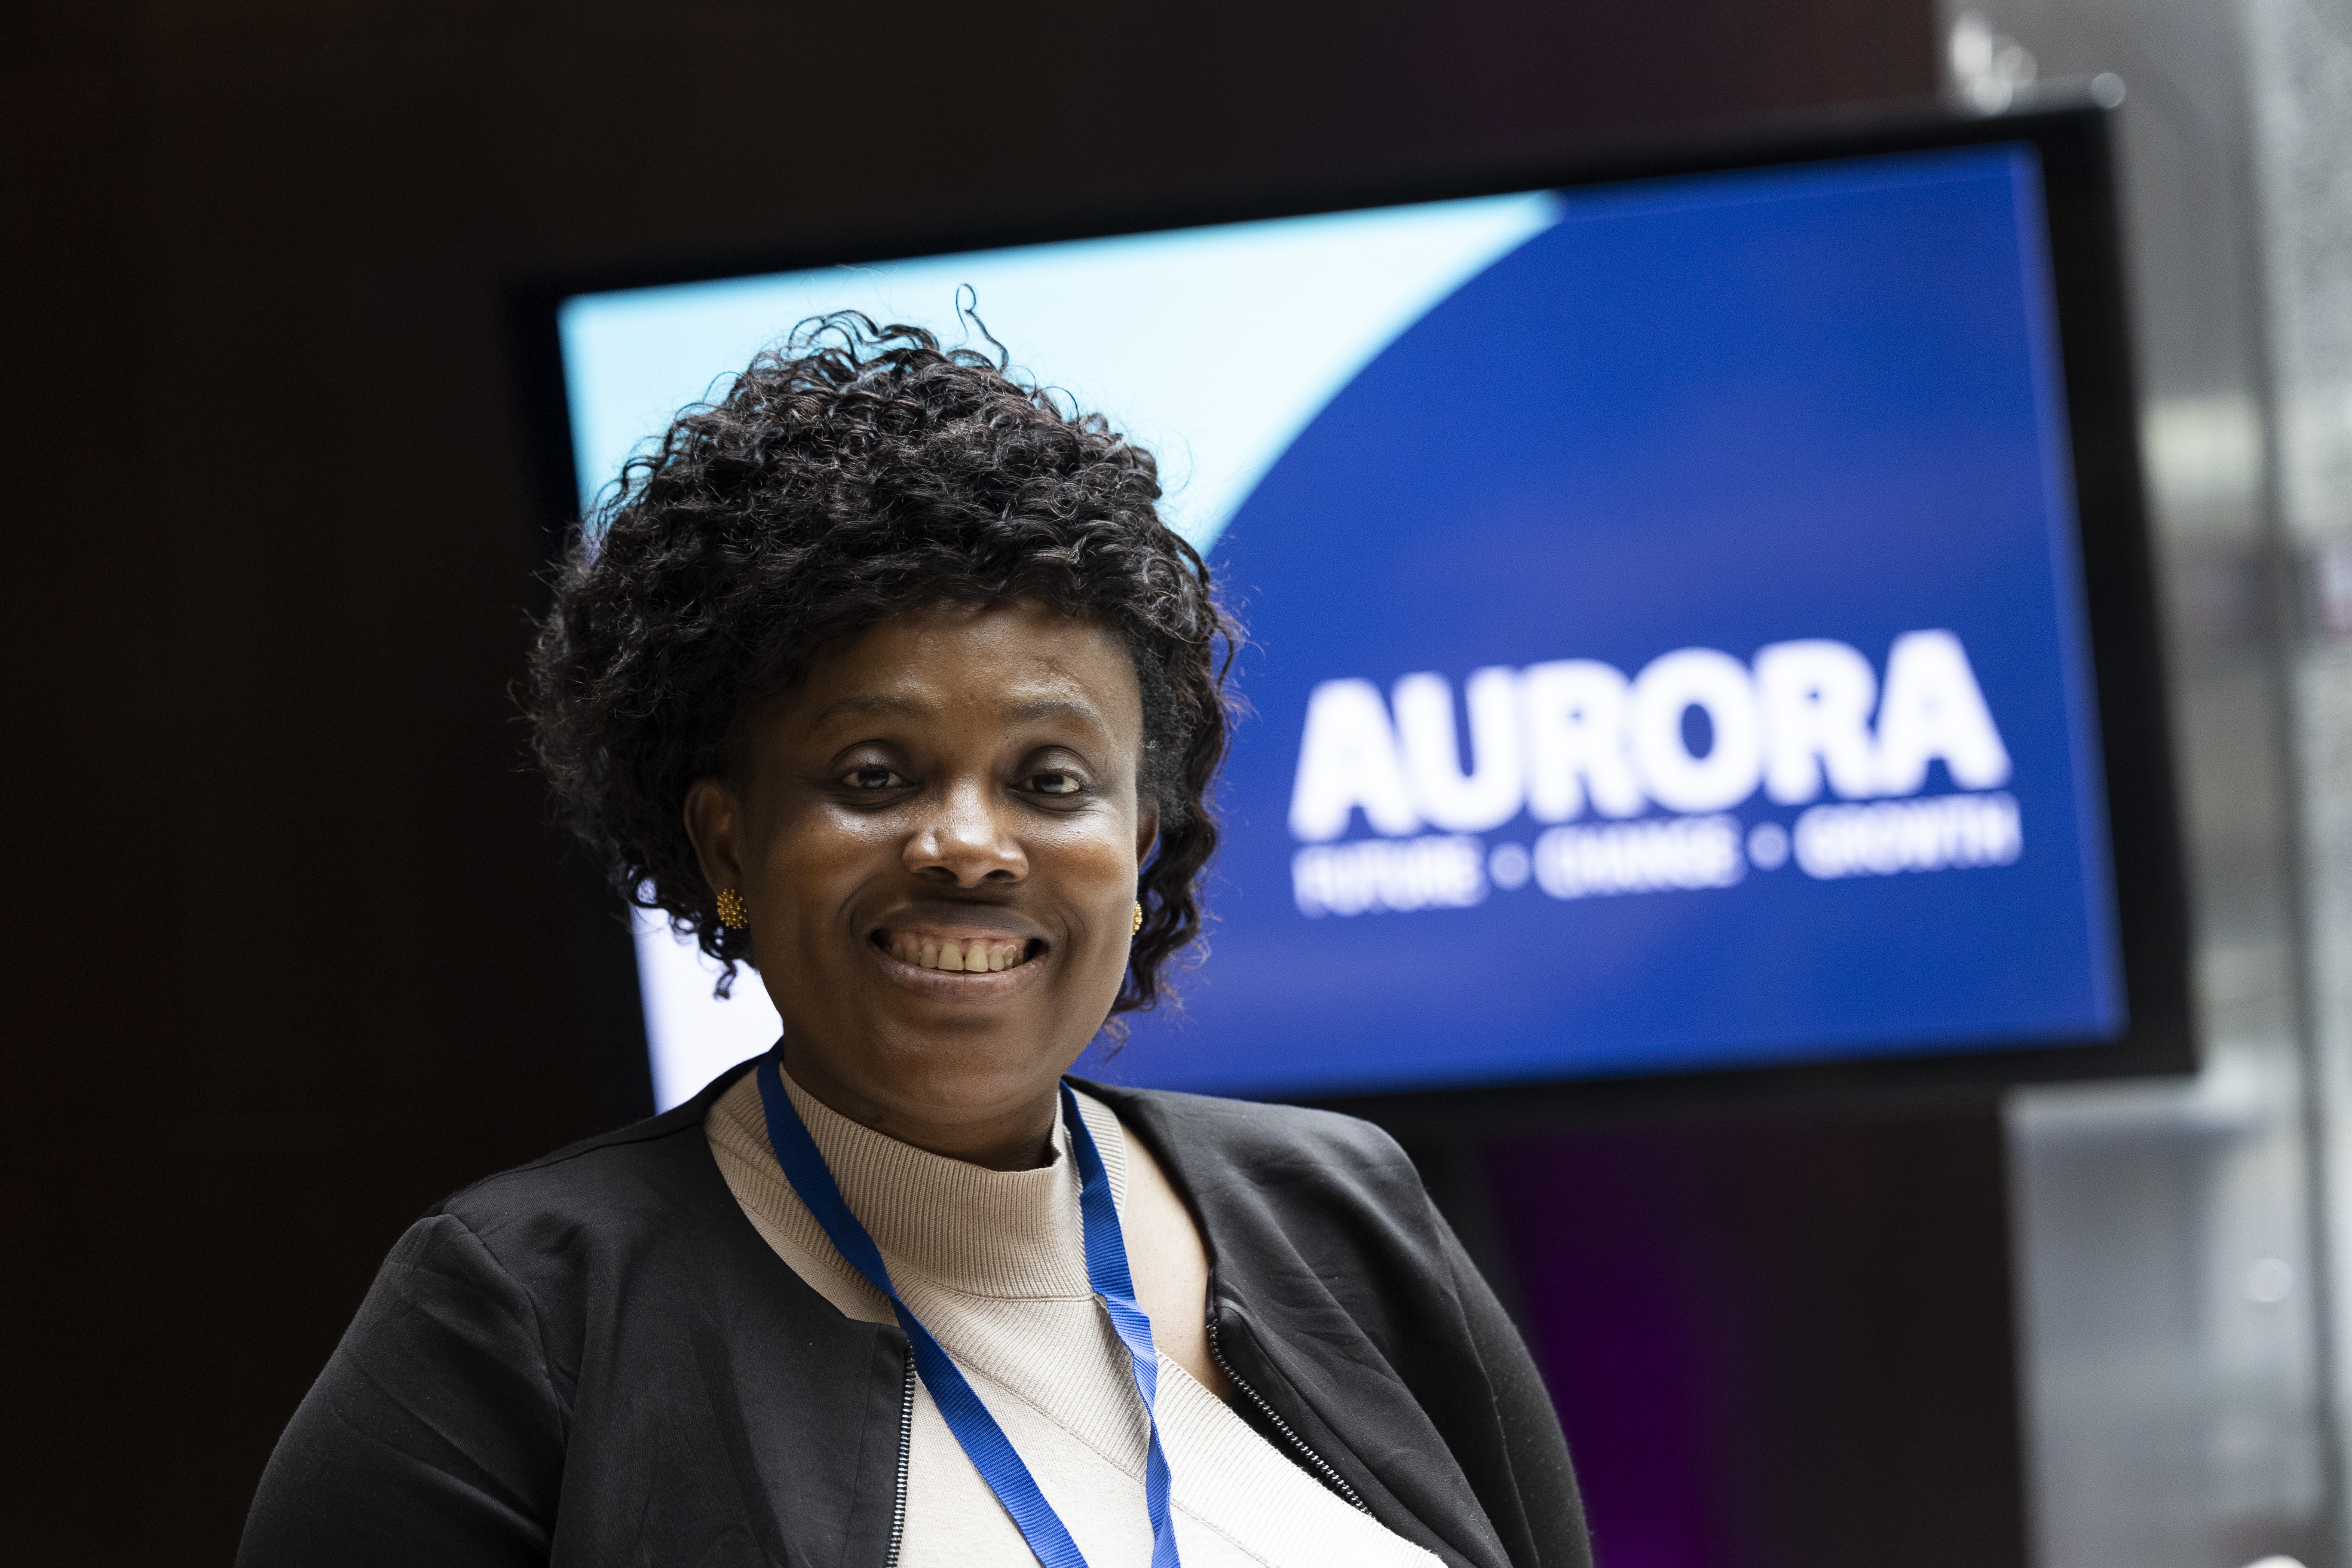 Woman smiling with Aurora programme signage in the background